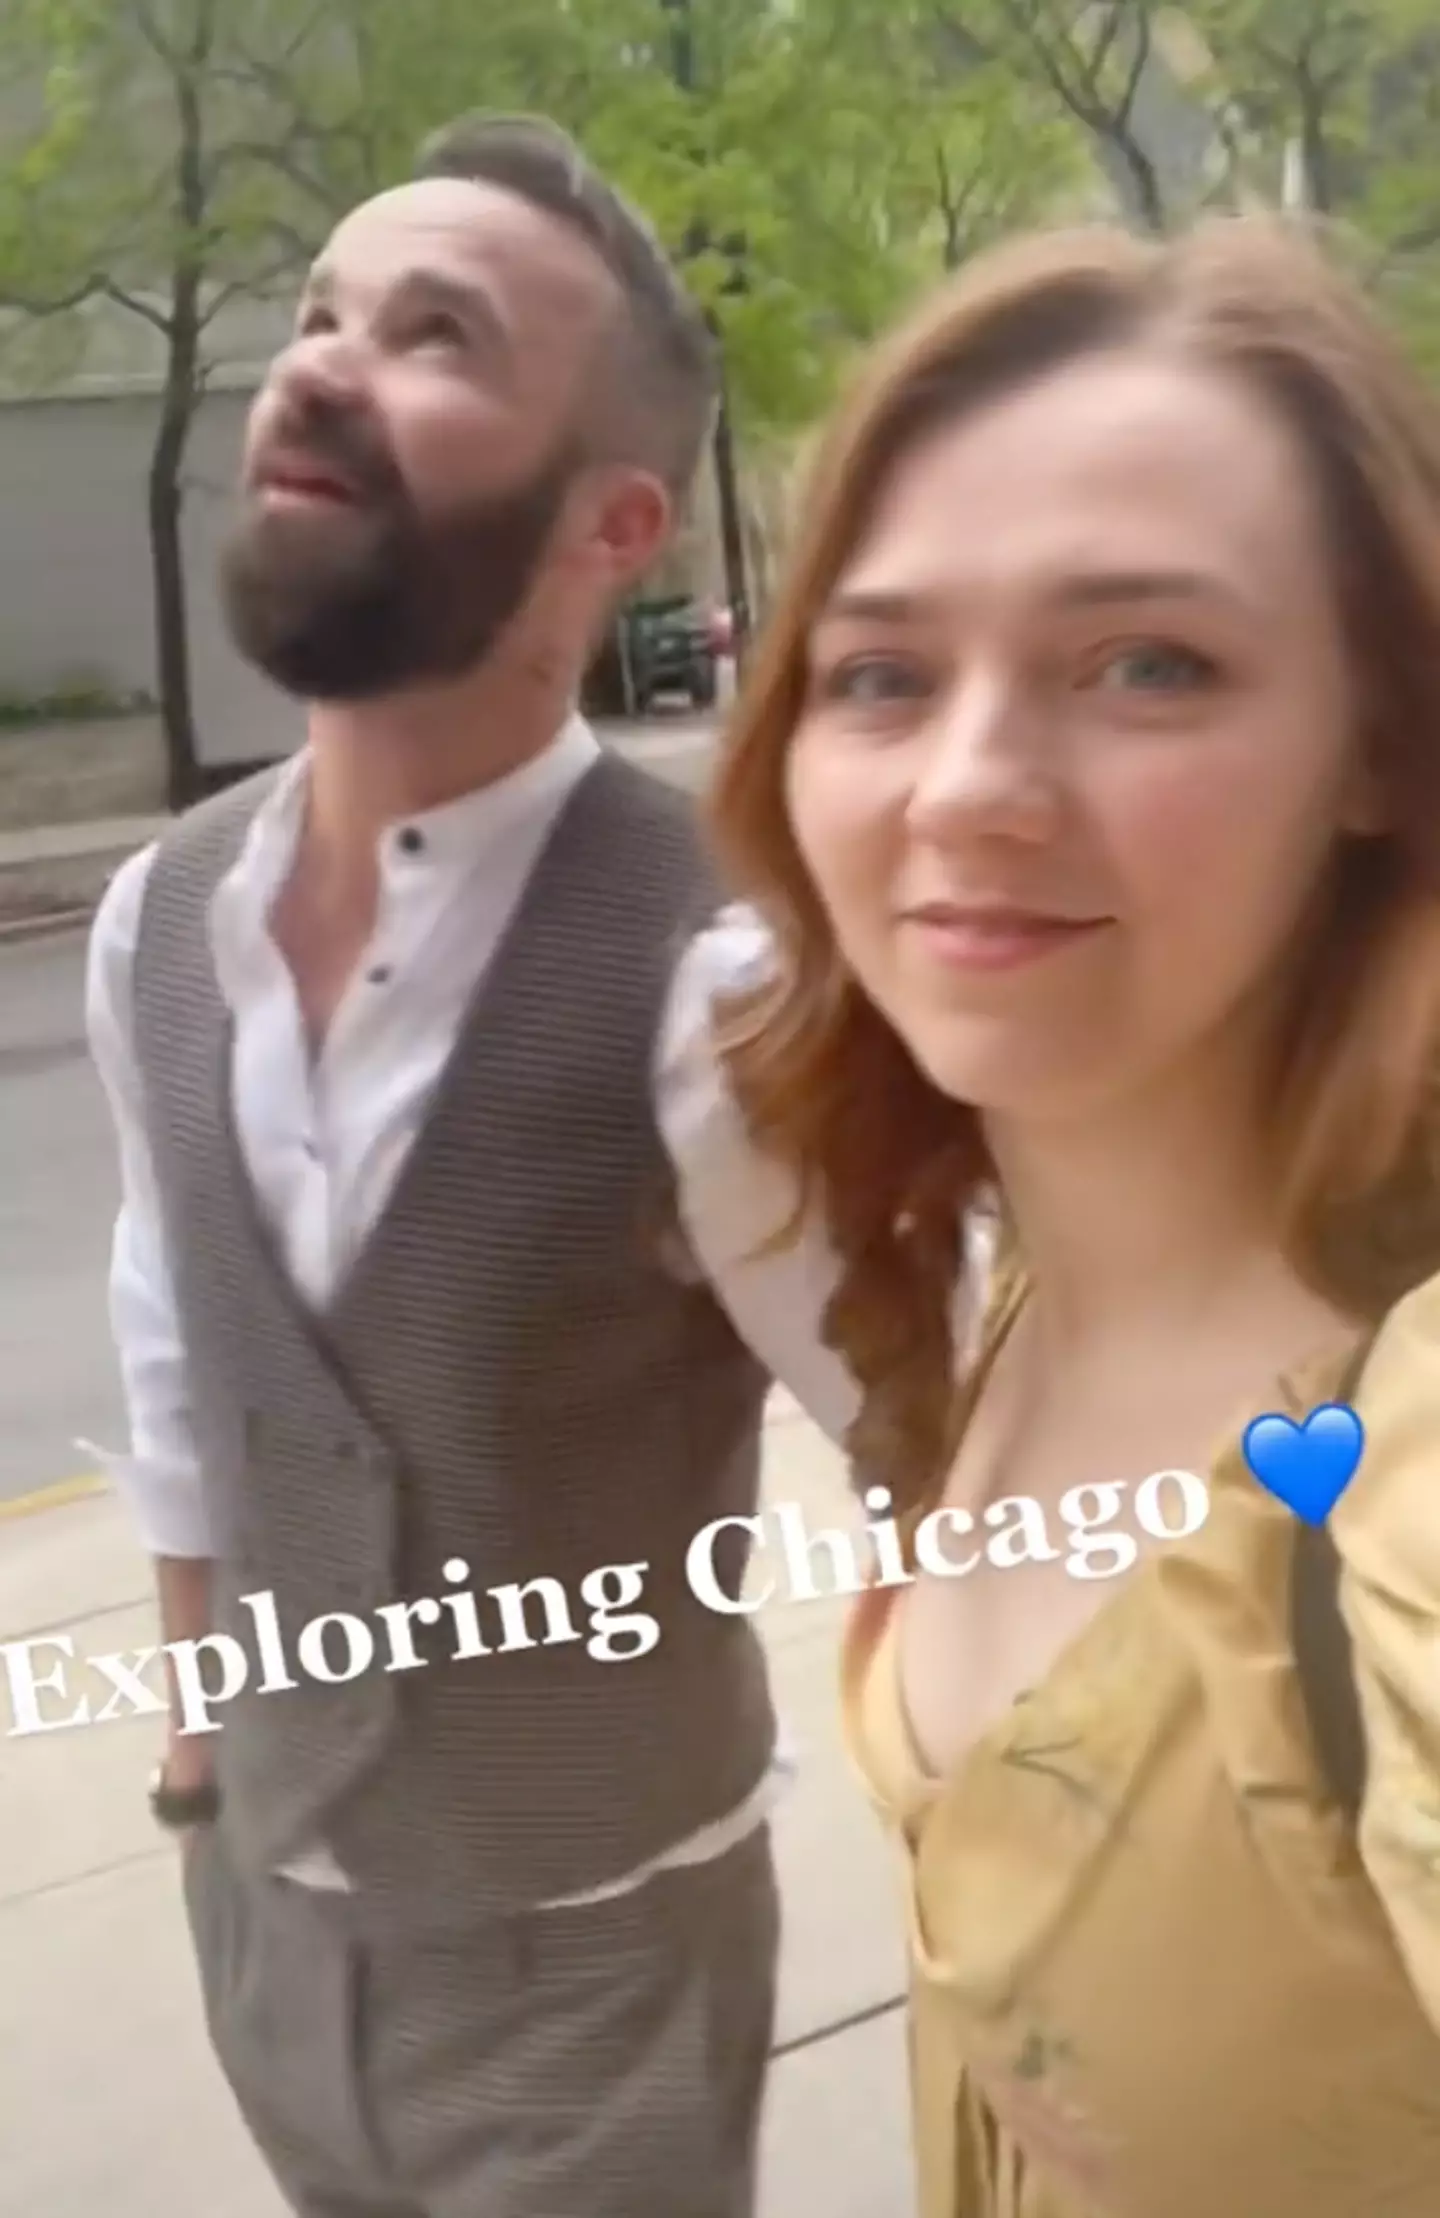 The pair enjoyed dinner and drinks in Chicago.